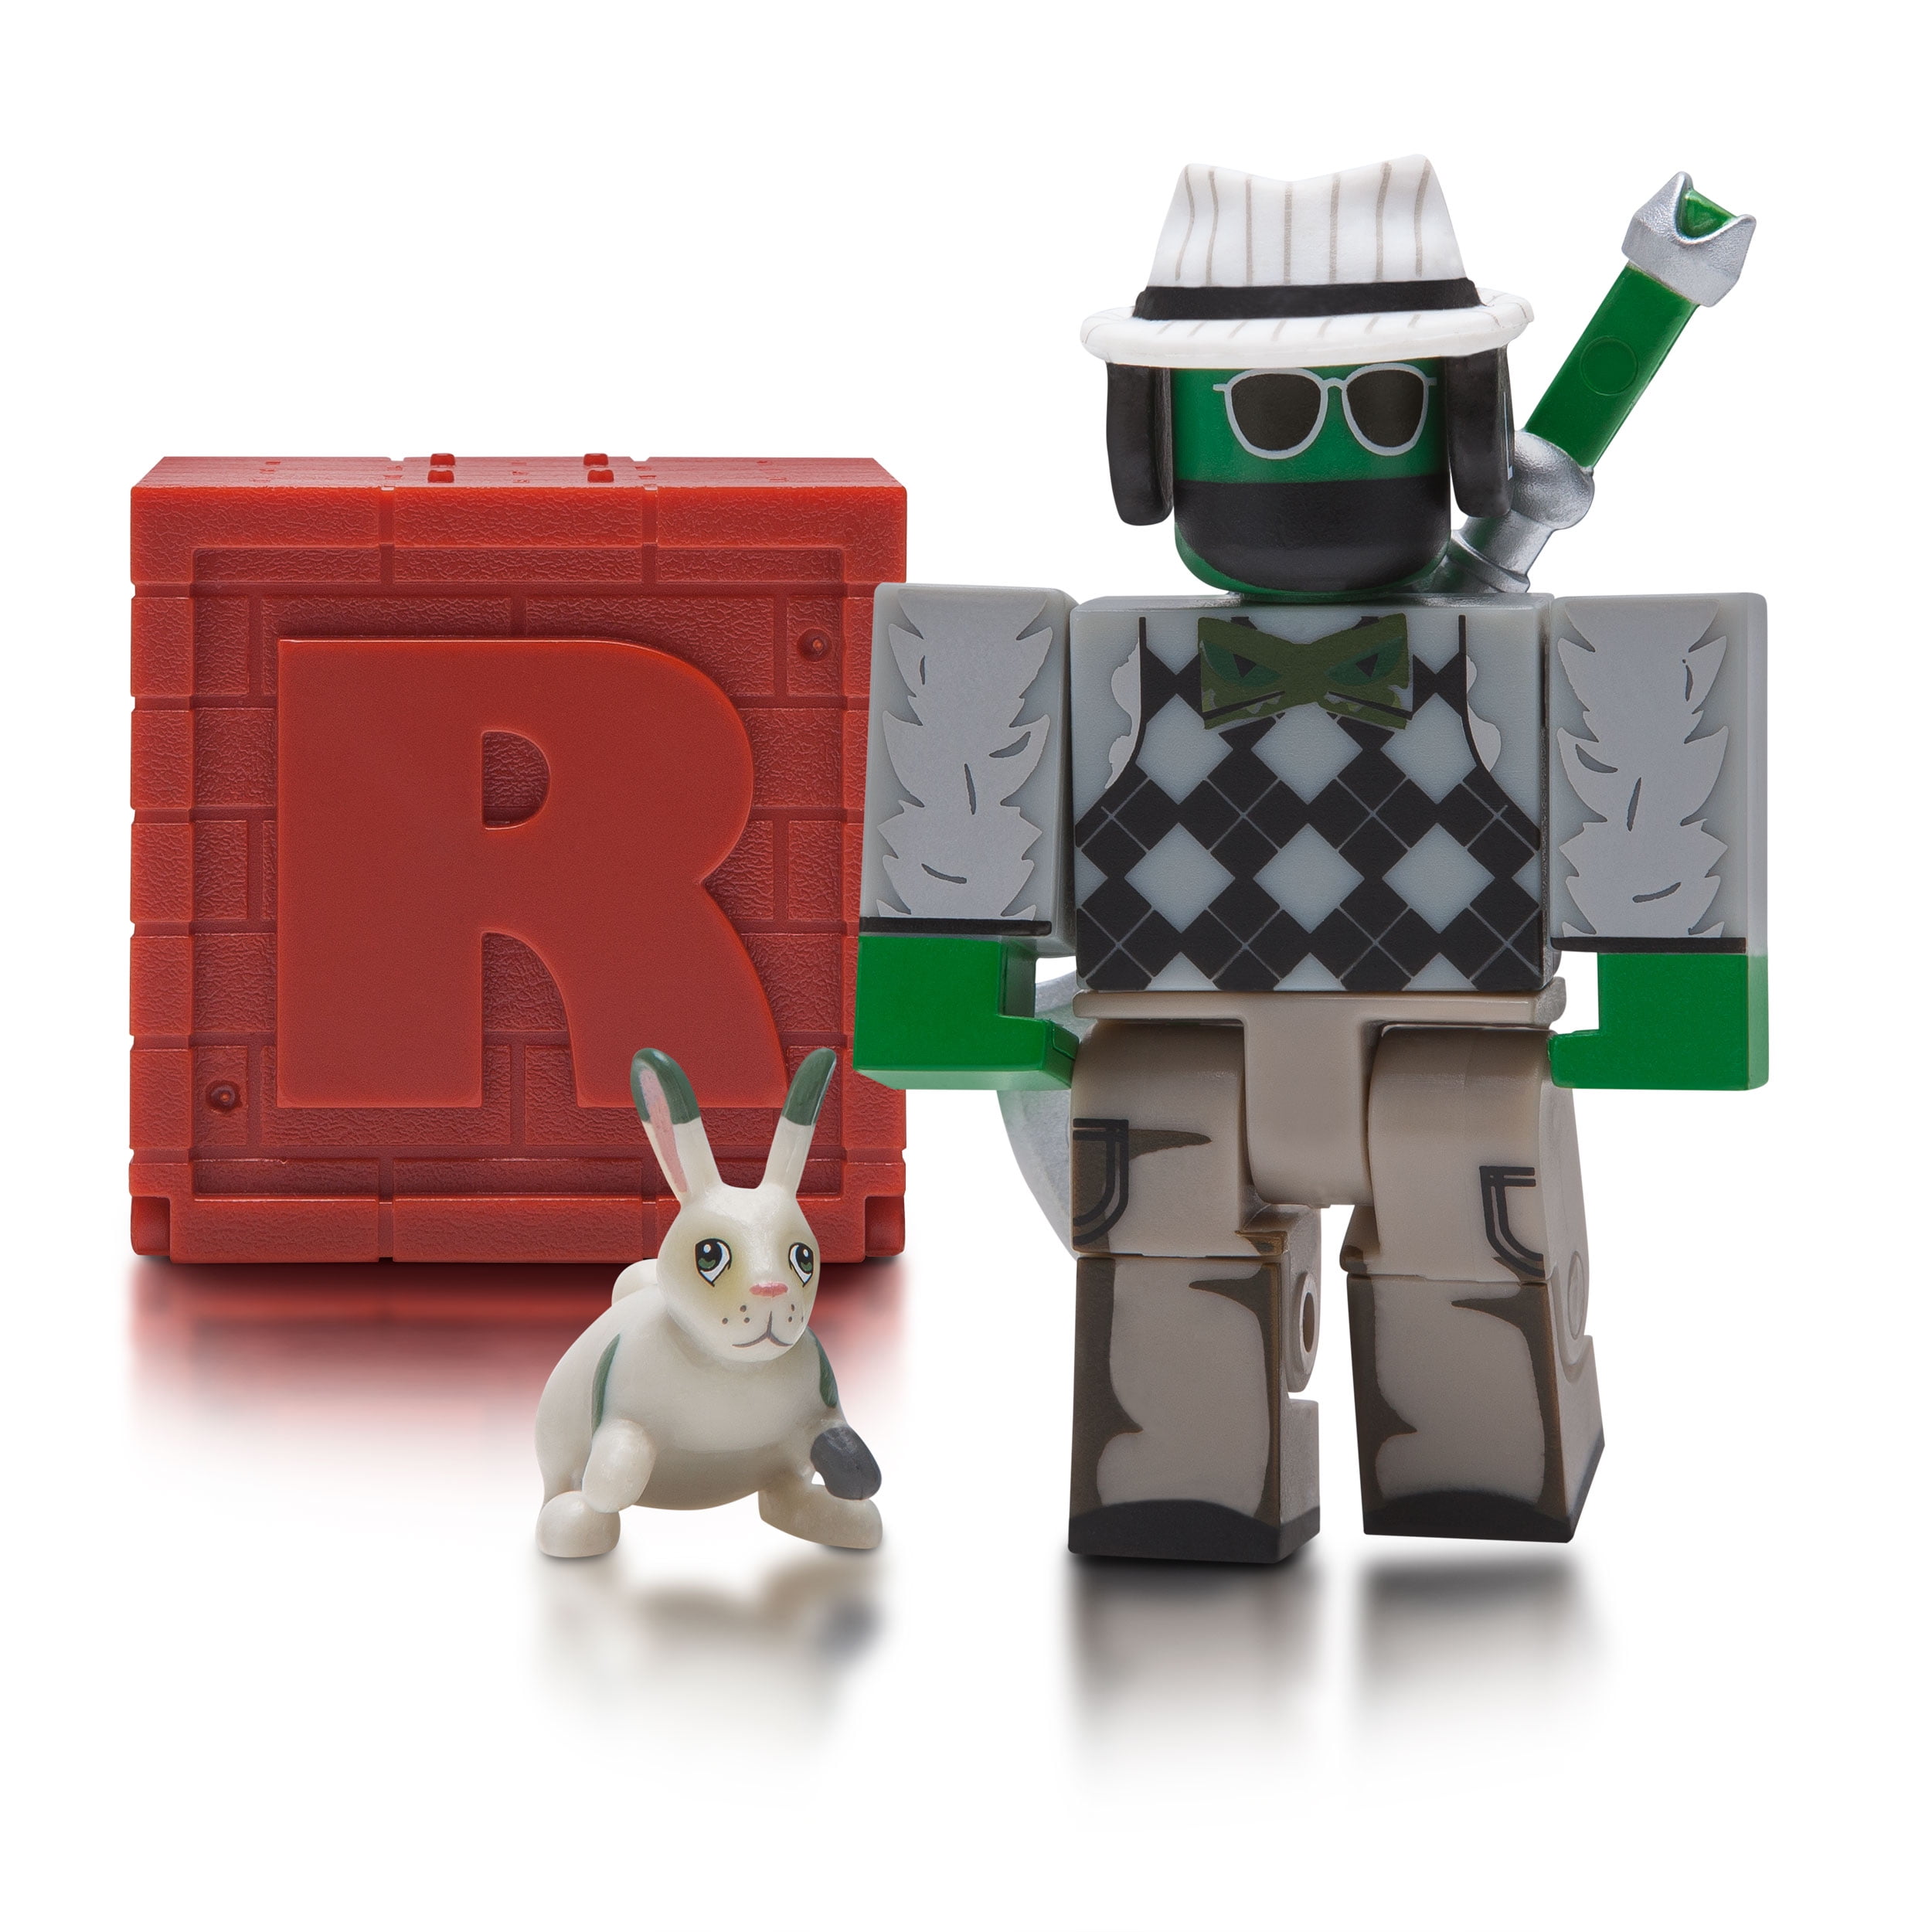 Roblox Series 1 2 3 4 Mystery Red Box Figures Kids Toys Packs+Virtual Game Codes 